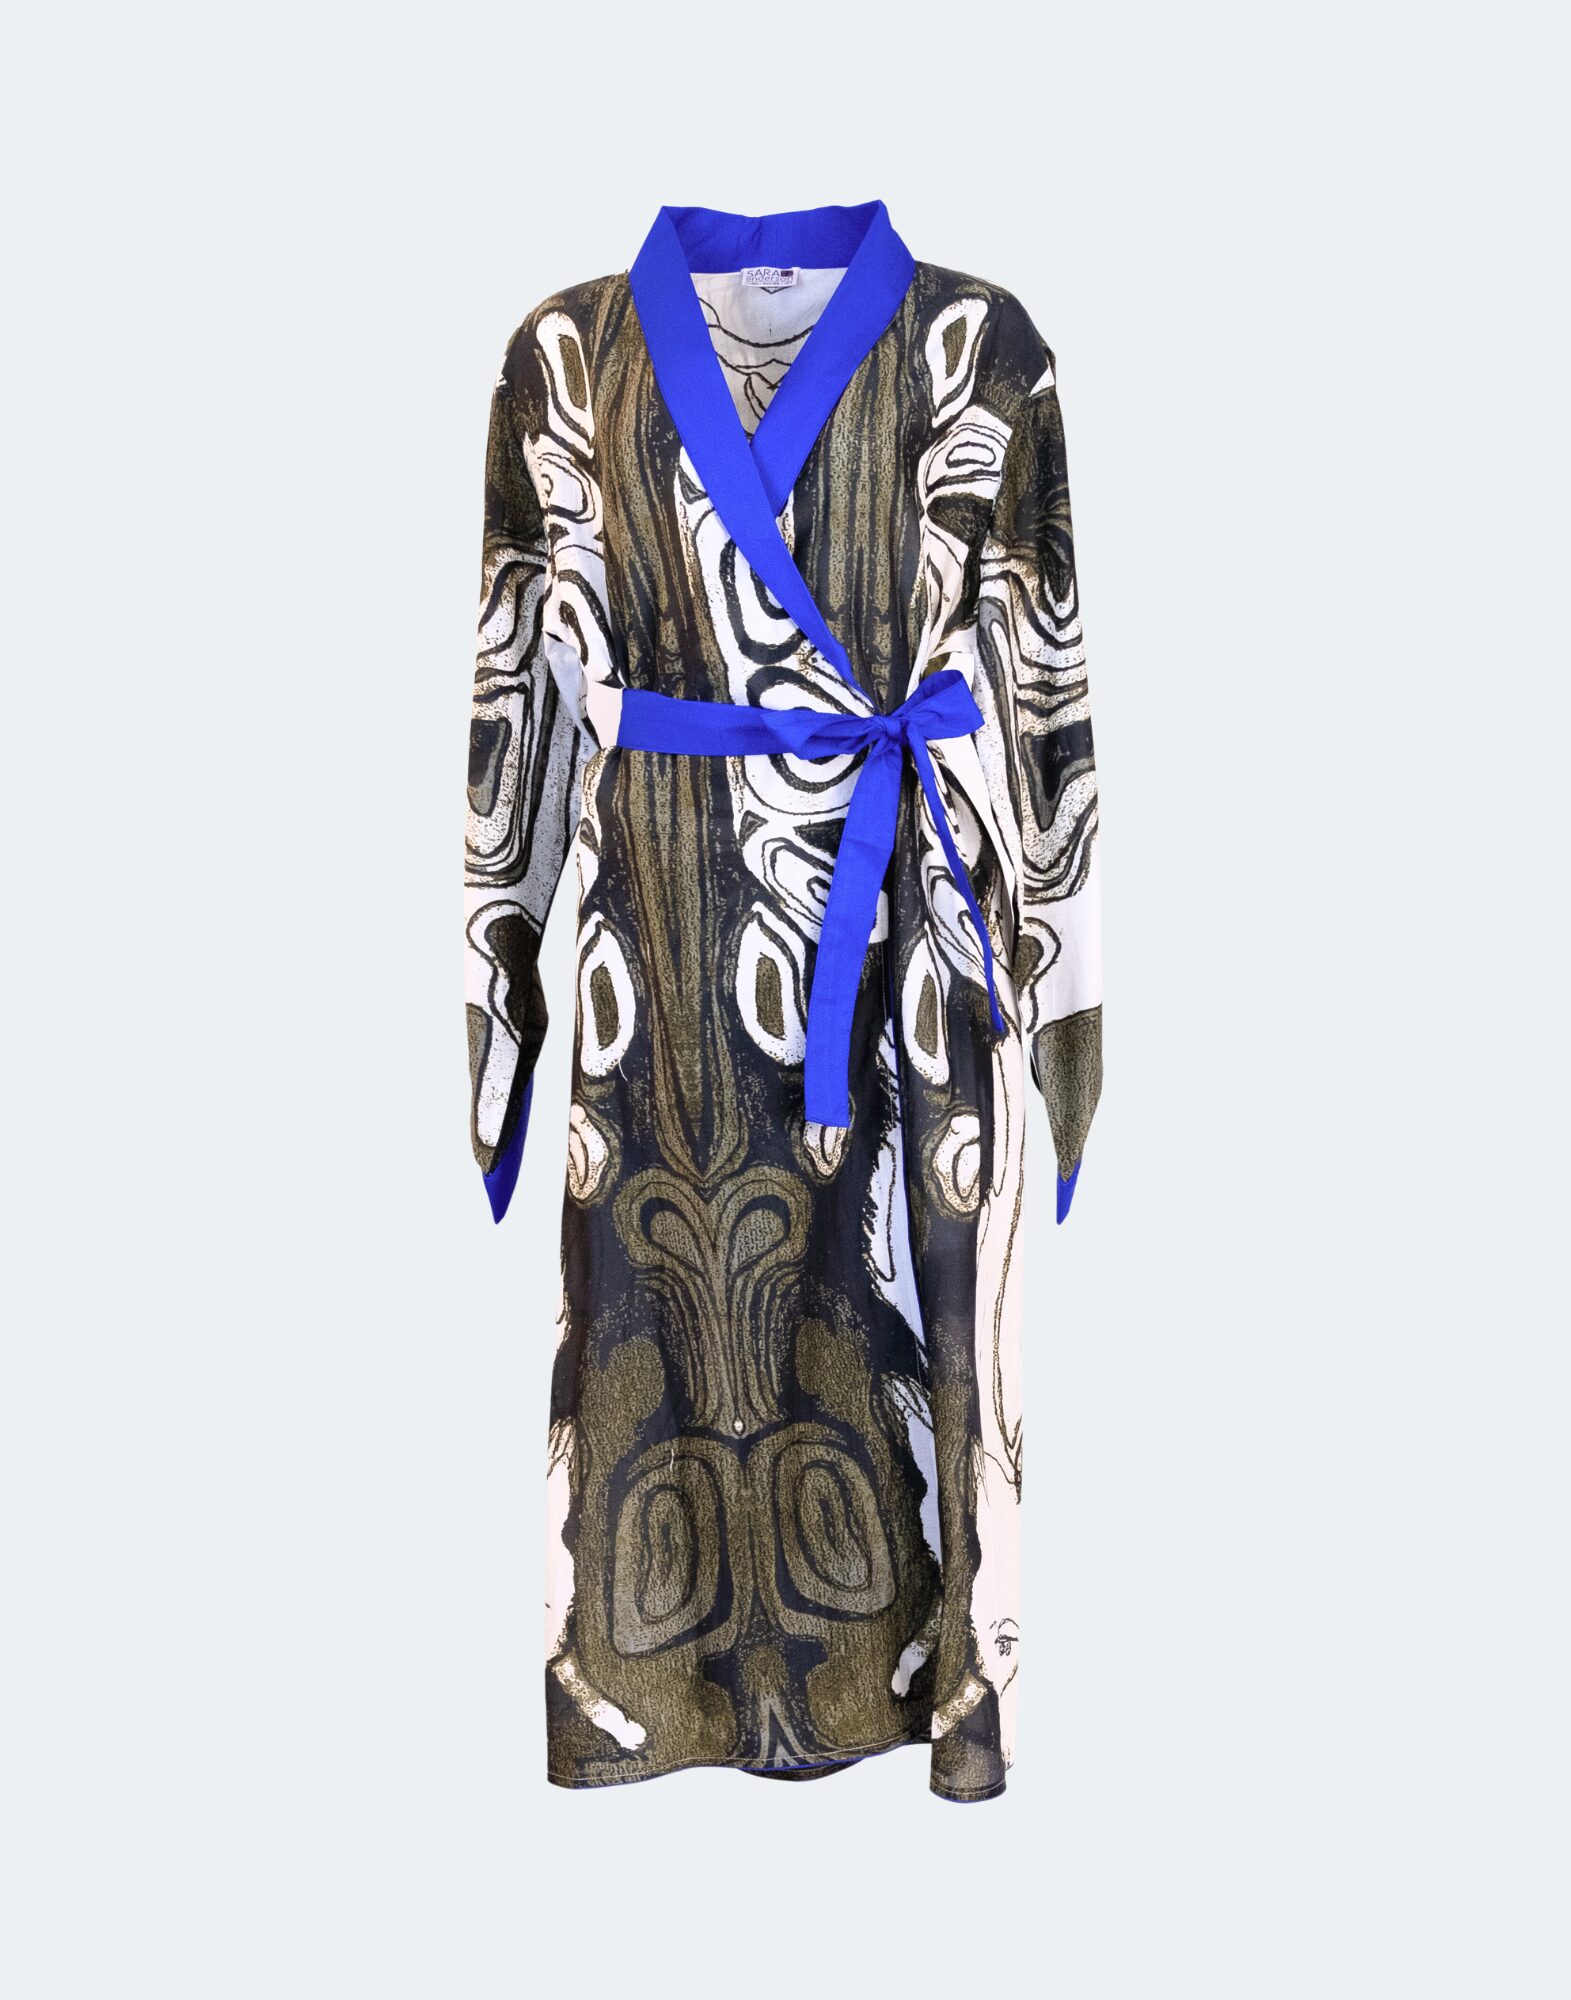 black and white robe with blue collar and sash